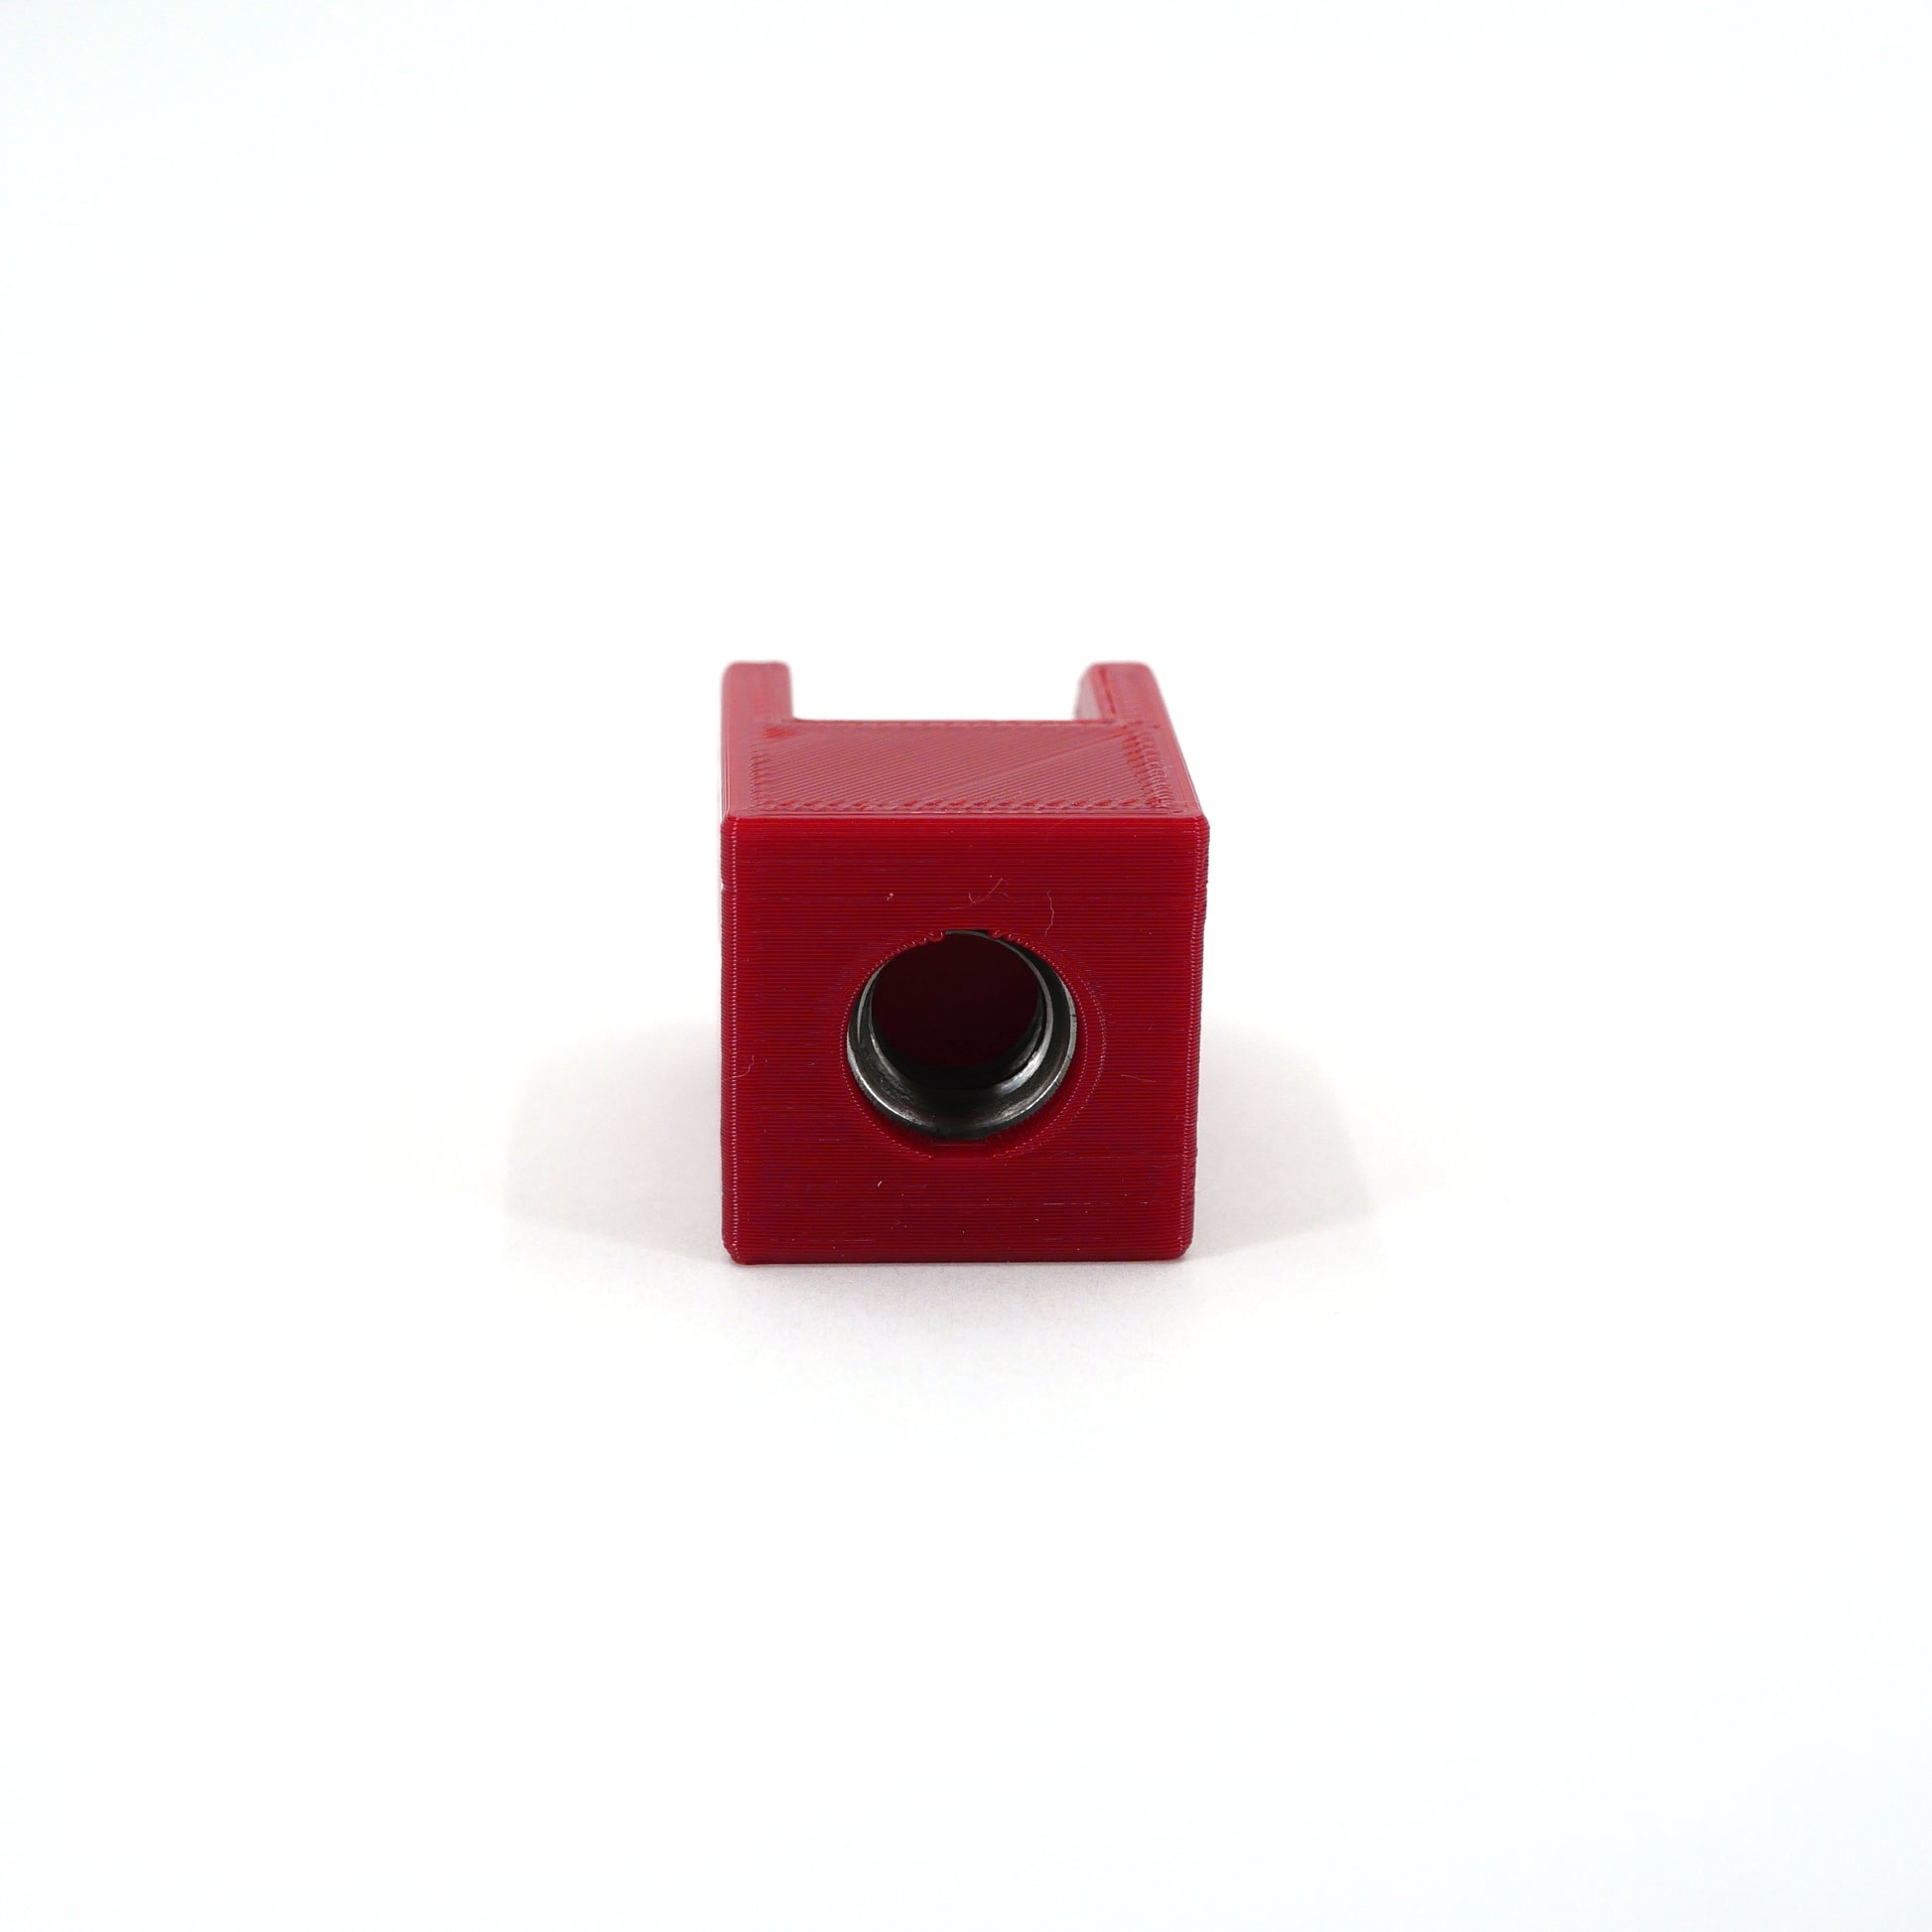 The bottom of a red HyperX DuoCast microphone mount adapter.